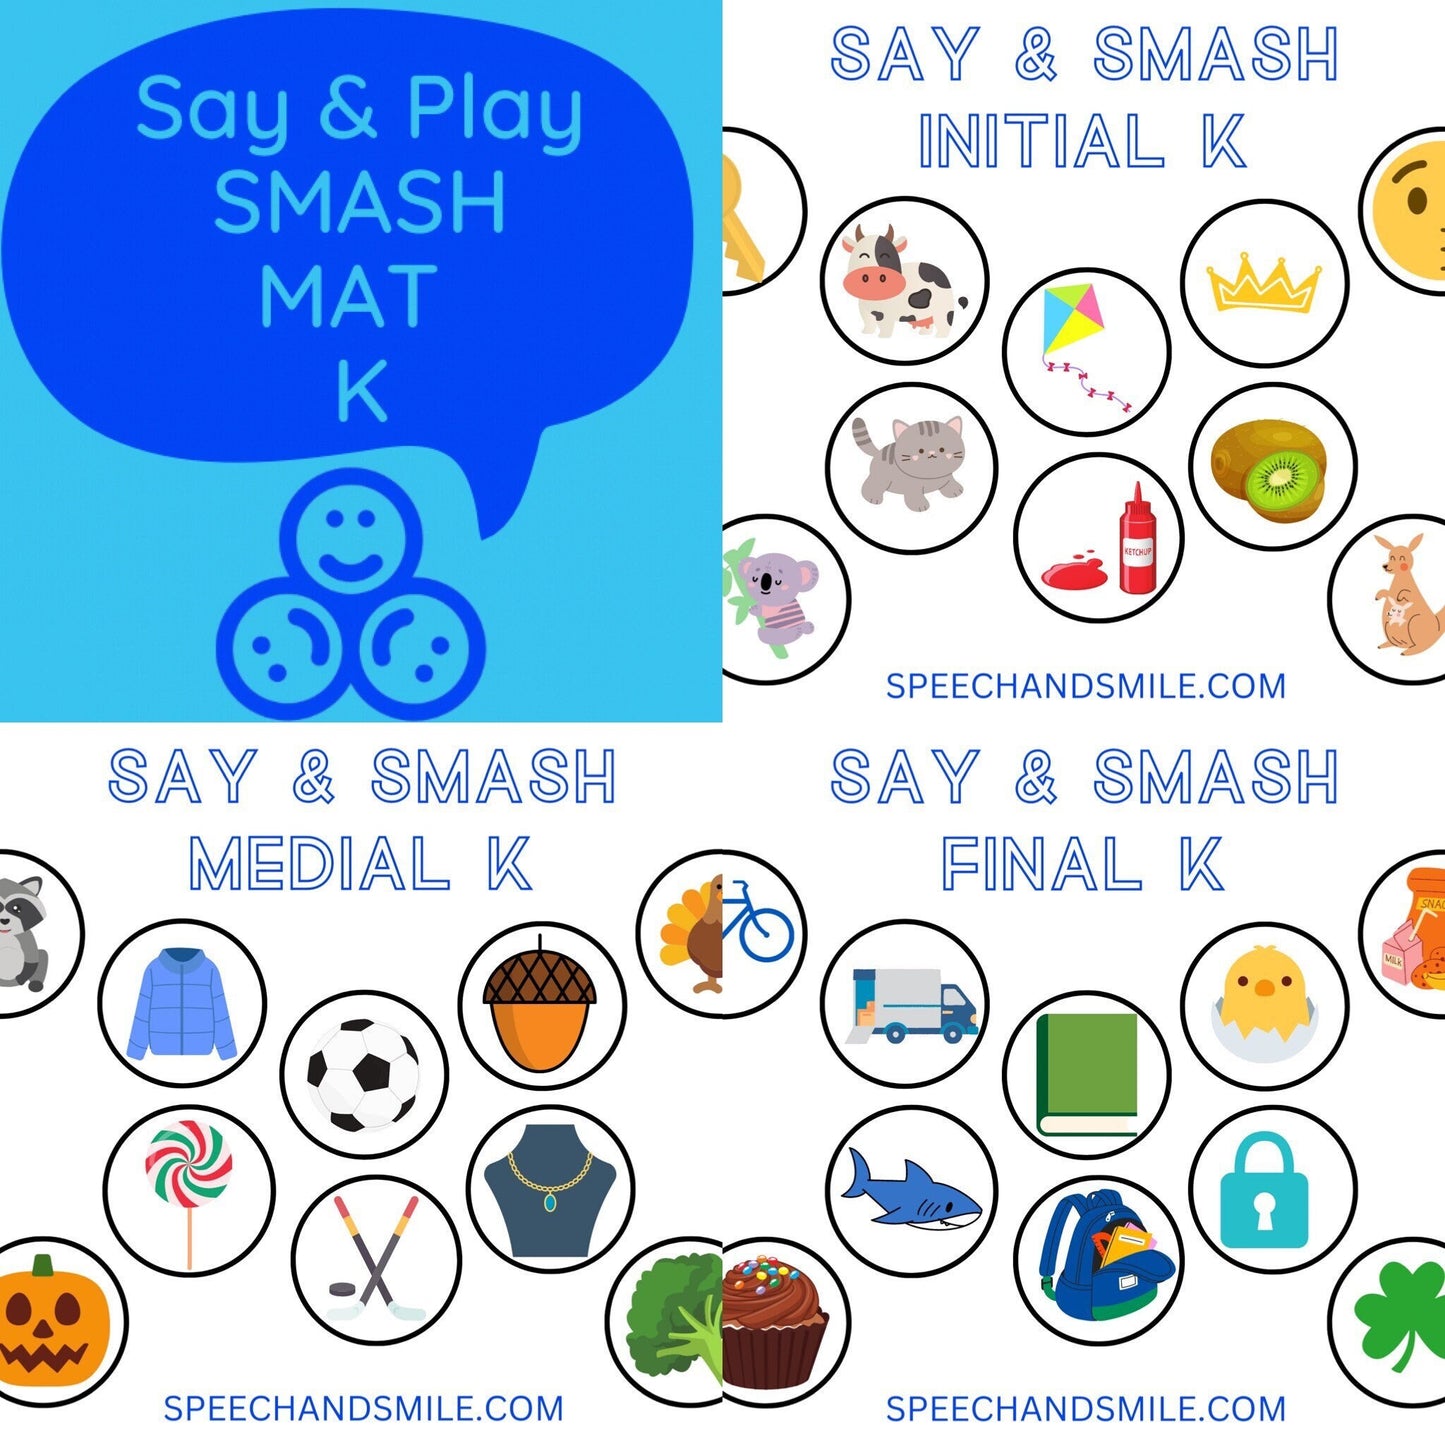 K Sound Smash Mat for Playdough-Printable Speech Therapy Materials-Speech Therapy-Speech and Smile-Speech Therapy Tools- Letter K Activity